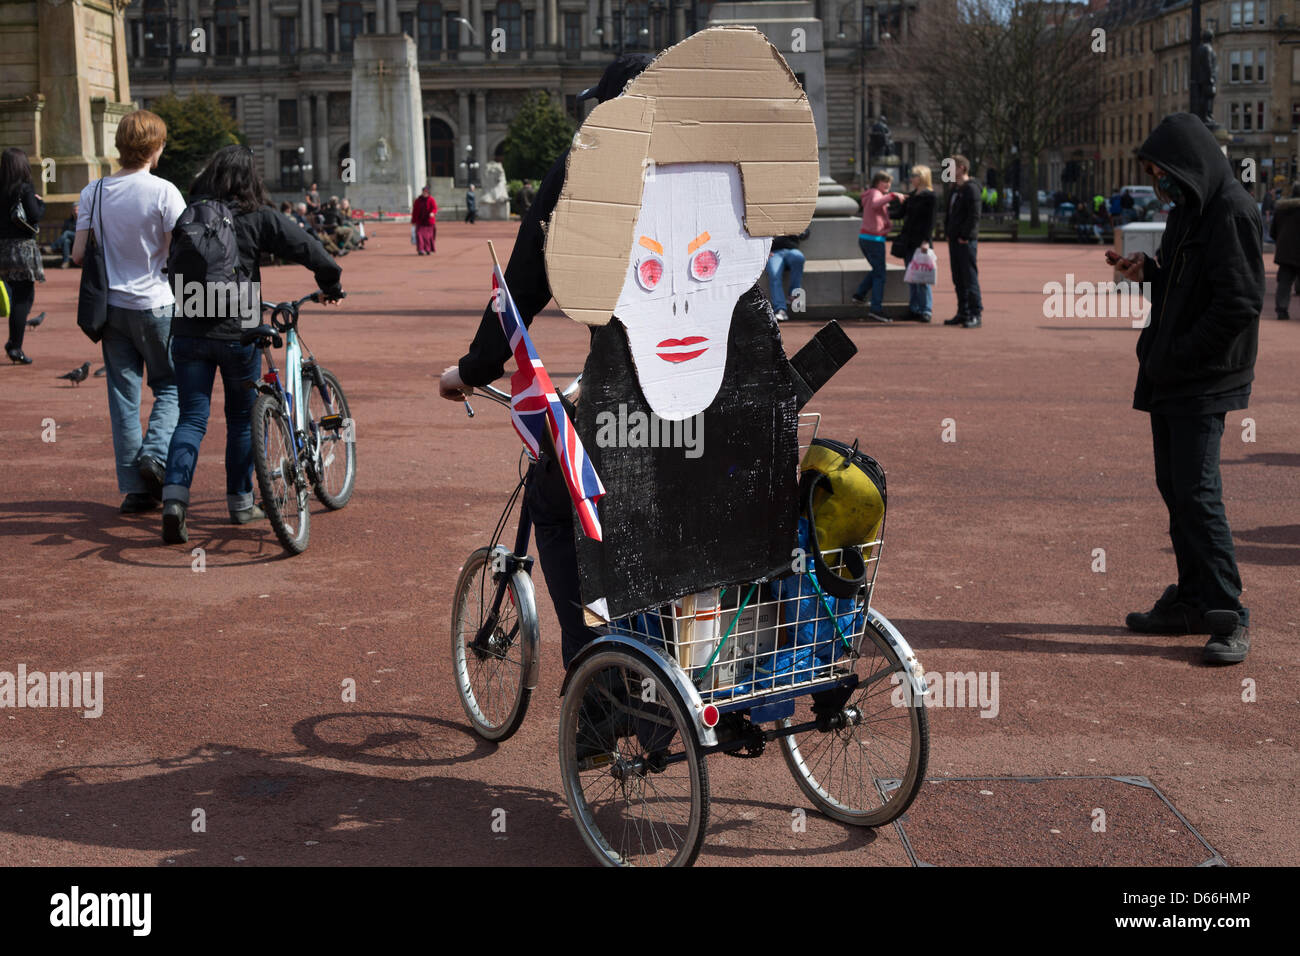 George Square, Glasgow, Scotland, UK. Saturday 13th April 2013. 'Thatcher is Dead' party, with an attempt to burn an effigy of British Conservative politician Baroness Margaret Thatcher, by young people, in George Square. Credit: Jeremy Sutton-hibbert /Alamy Live News Stock Photo